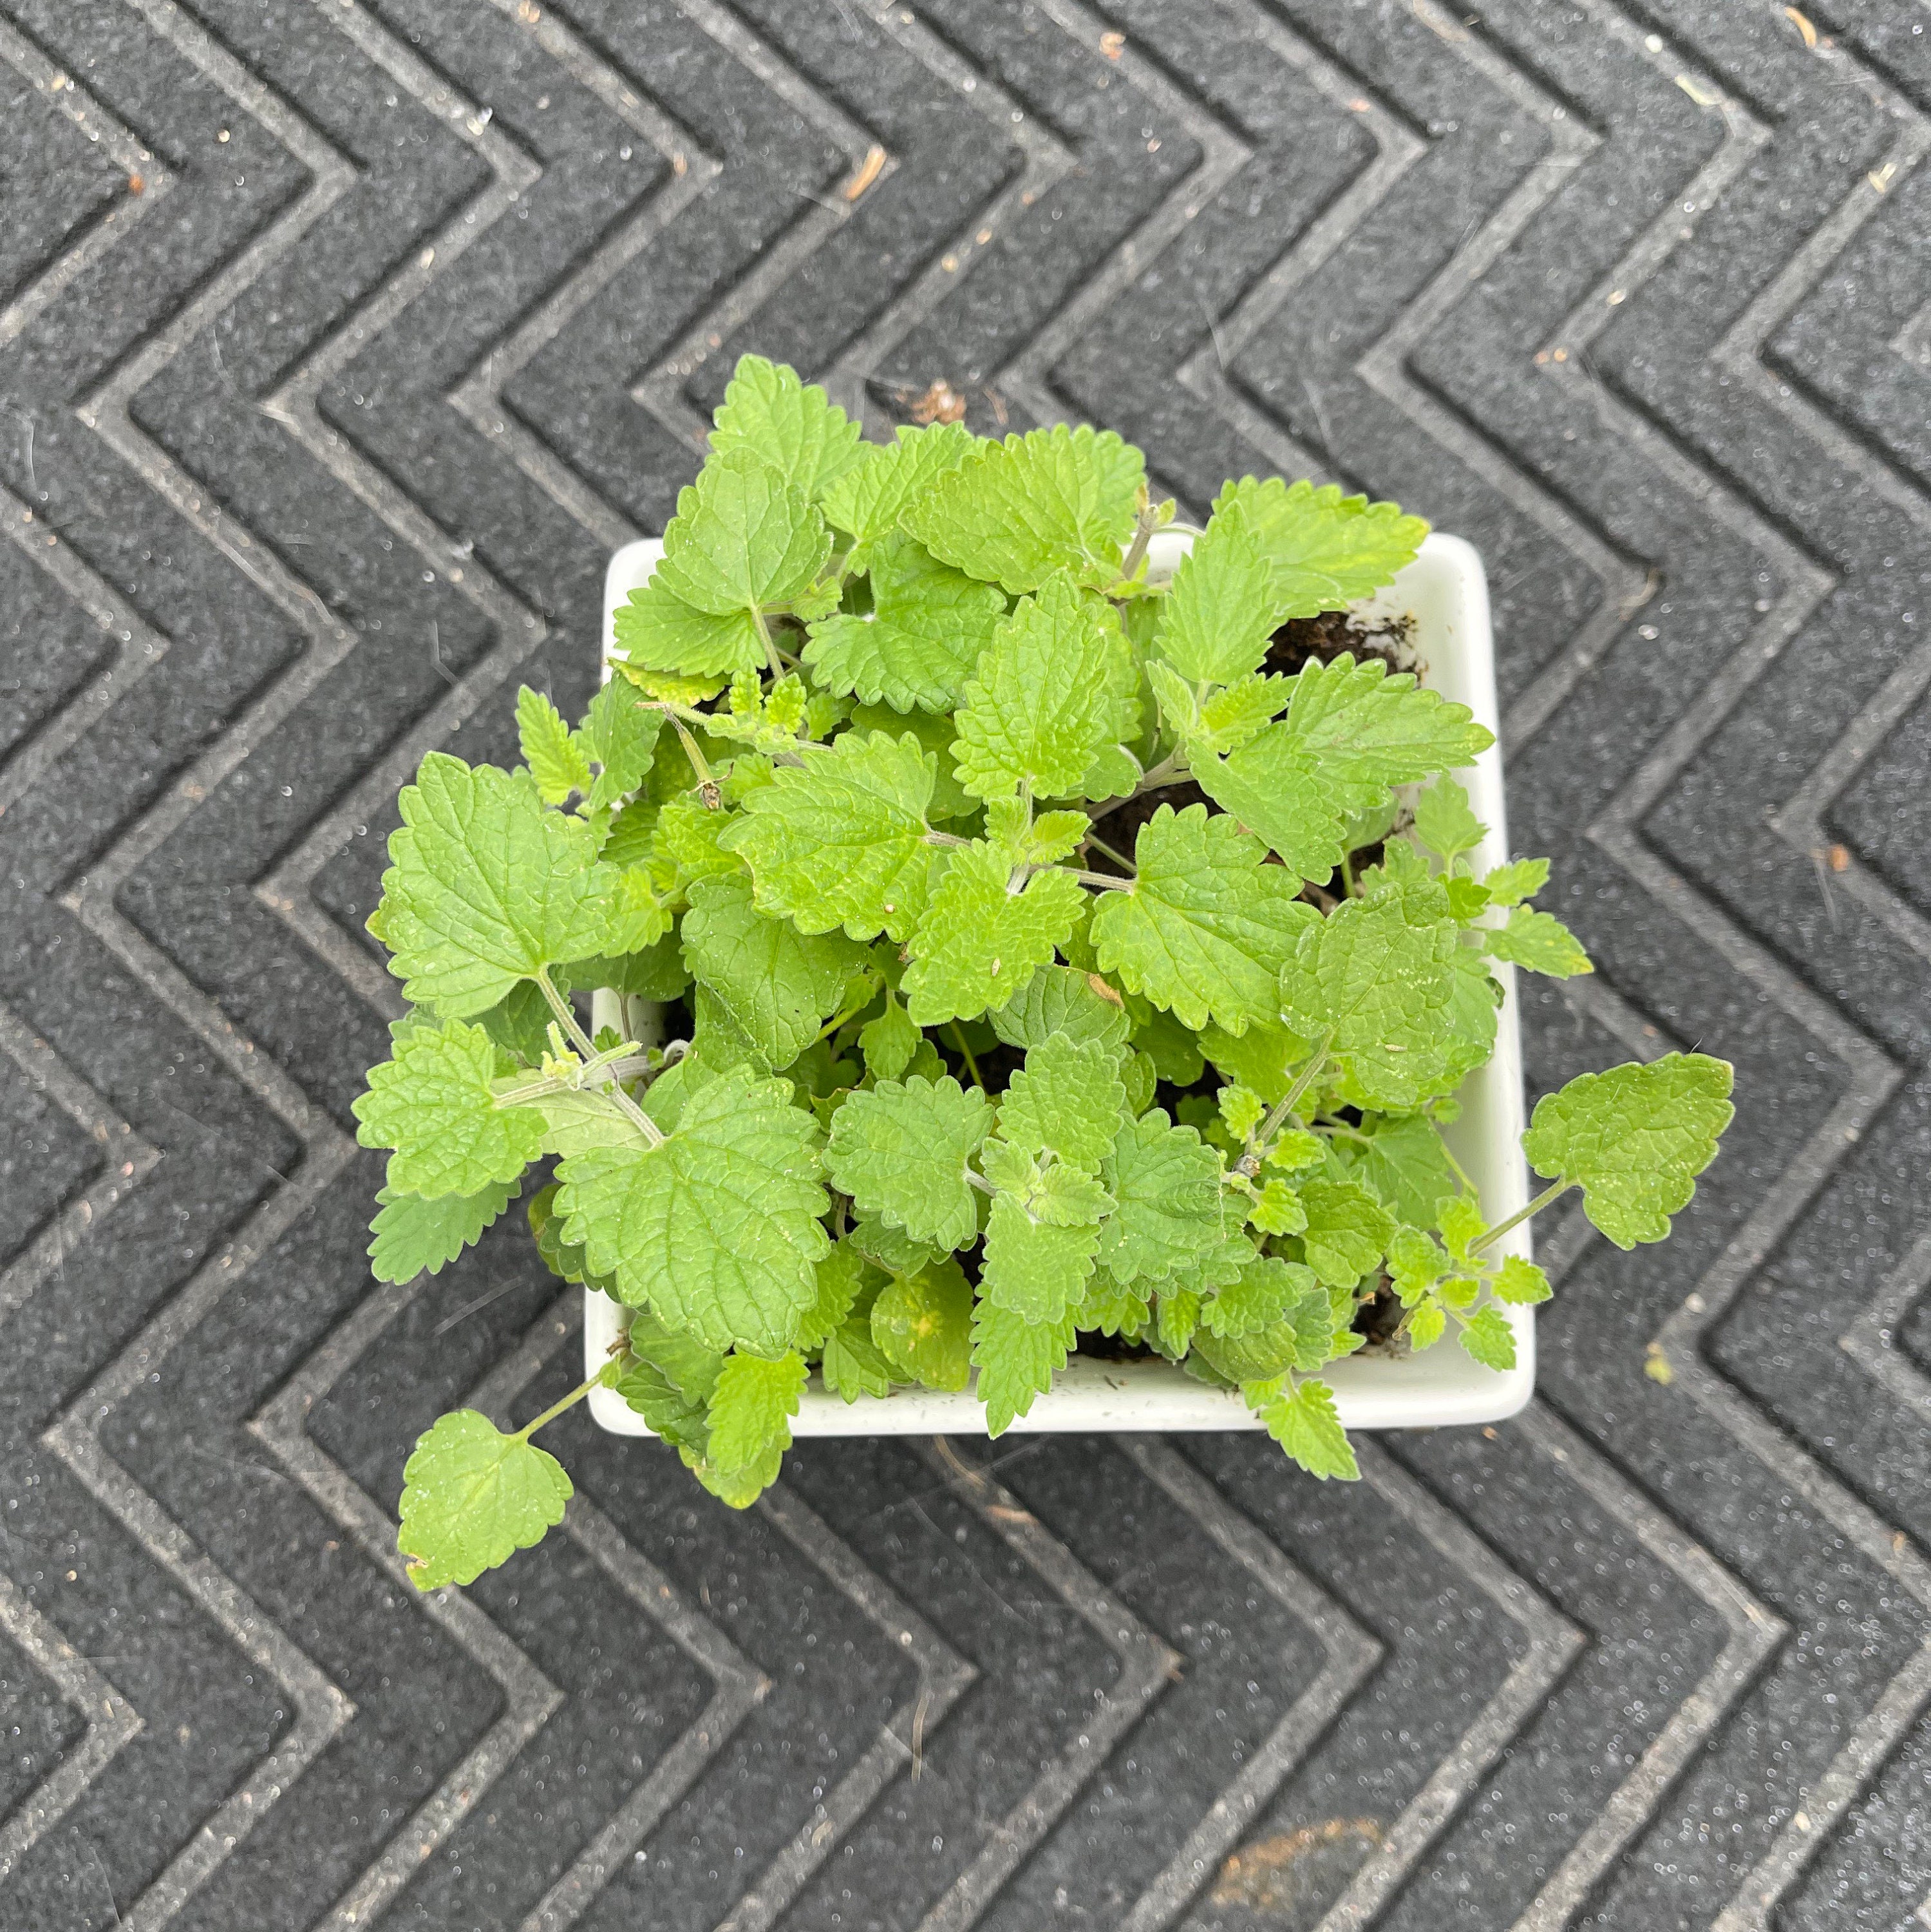 Catnip Herb Heirloom Seeds Non OGM, herbe à chat, pollinisation ouverte,  animaux domestiques -  France